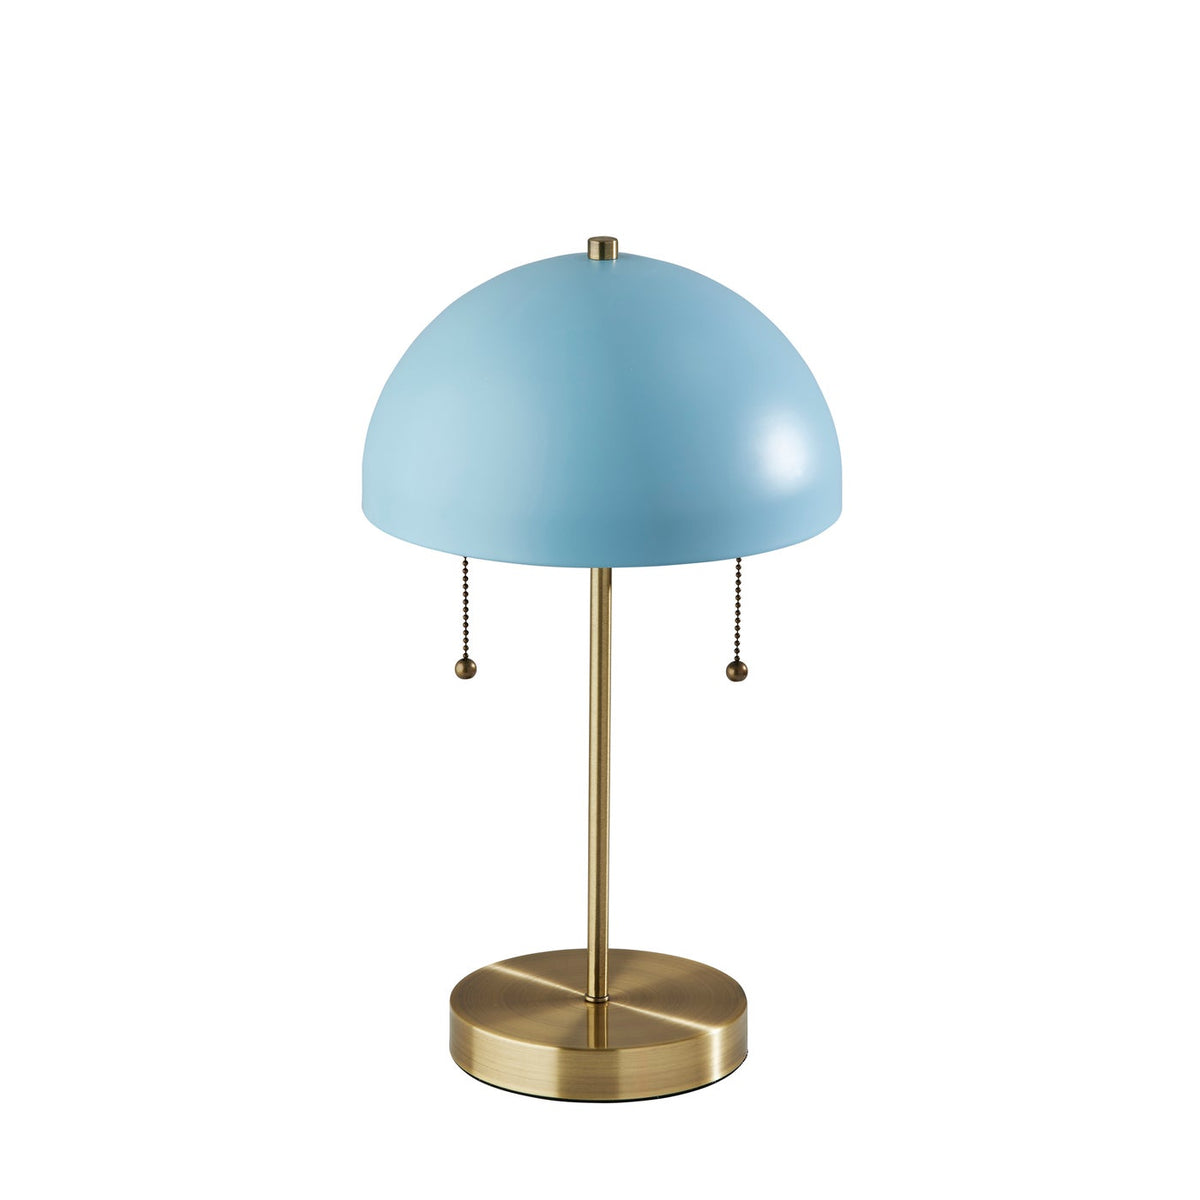 Adesso Home - 5132-07 - Two Light Table Lamp - Bowie - Antique Brass & Light Blue